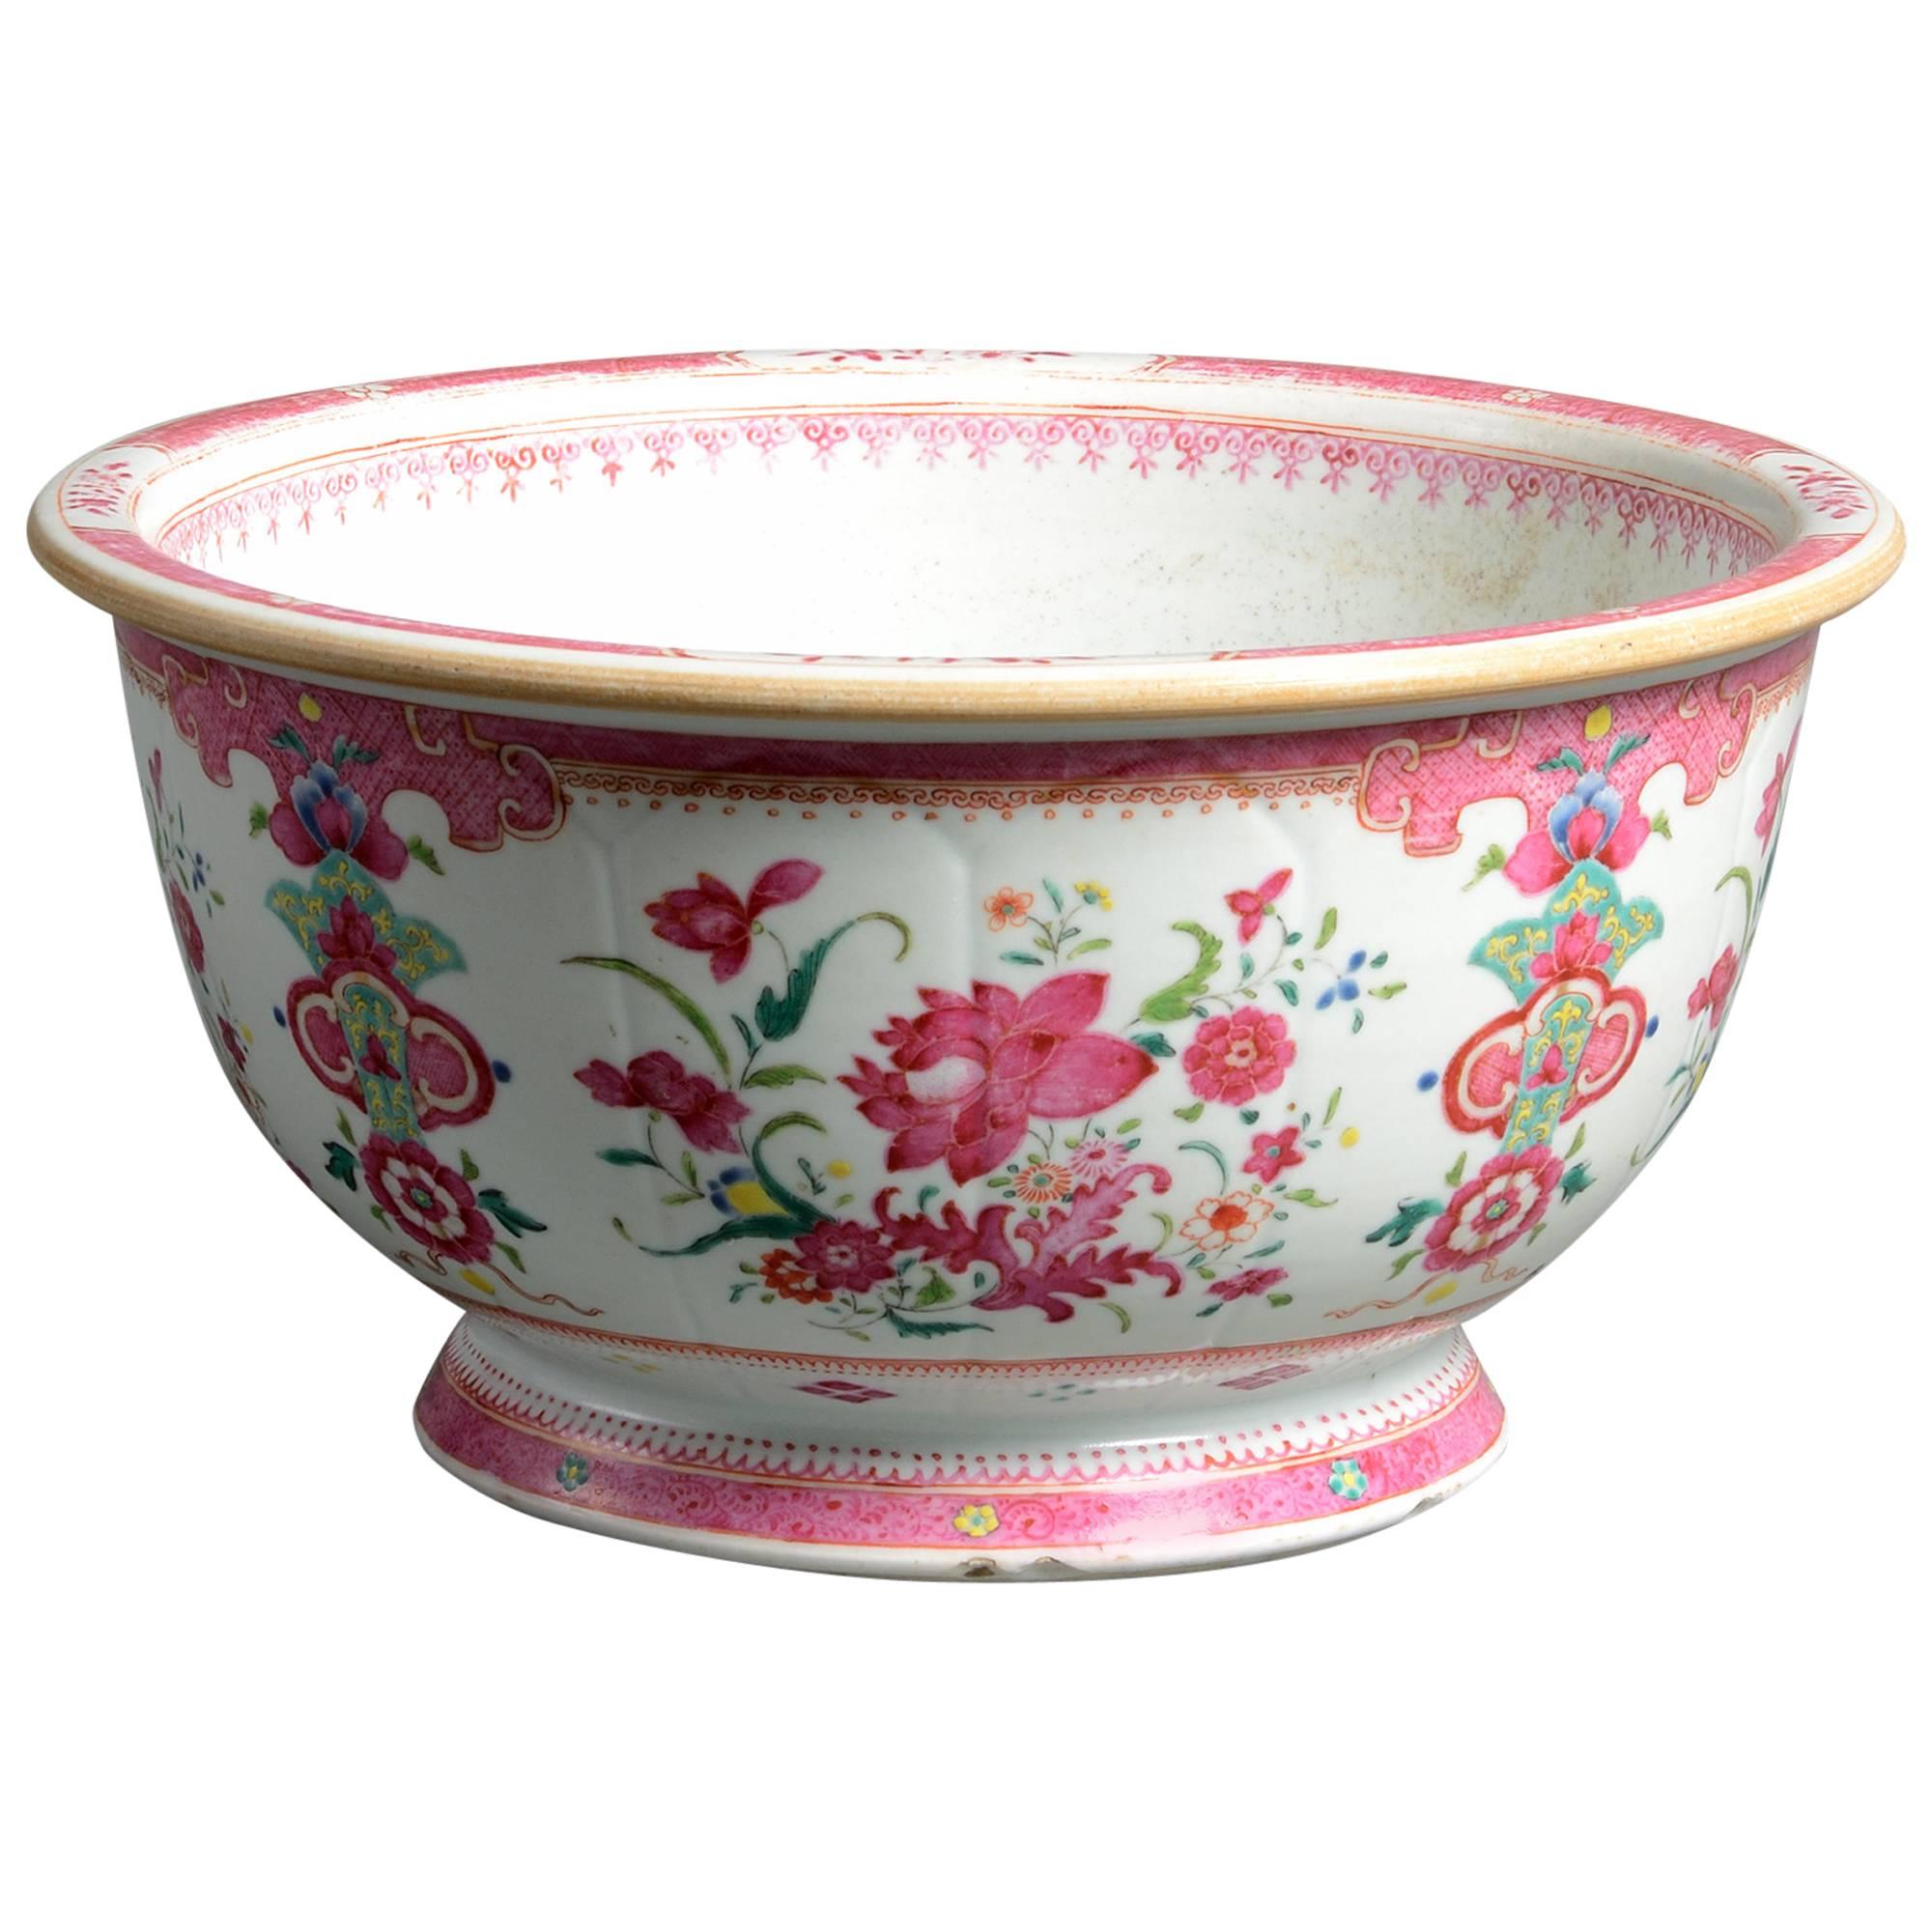 Early 19th Century Famille Rose Porcelain Bowl